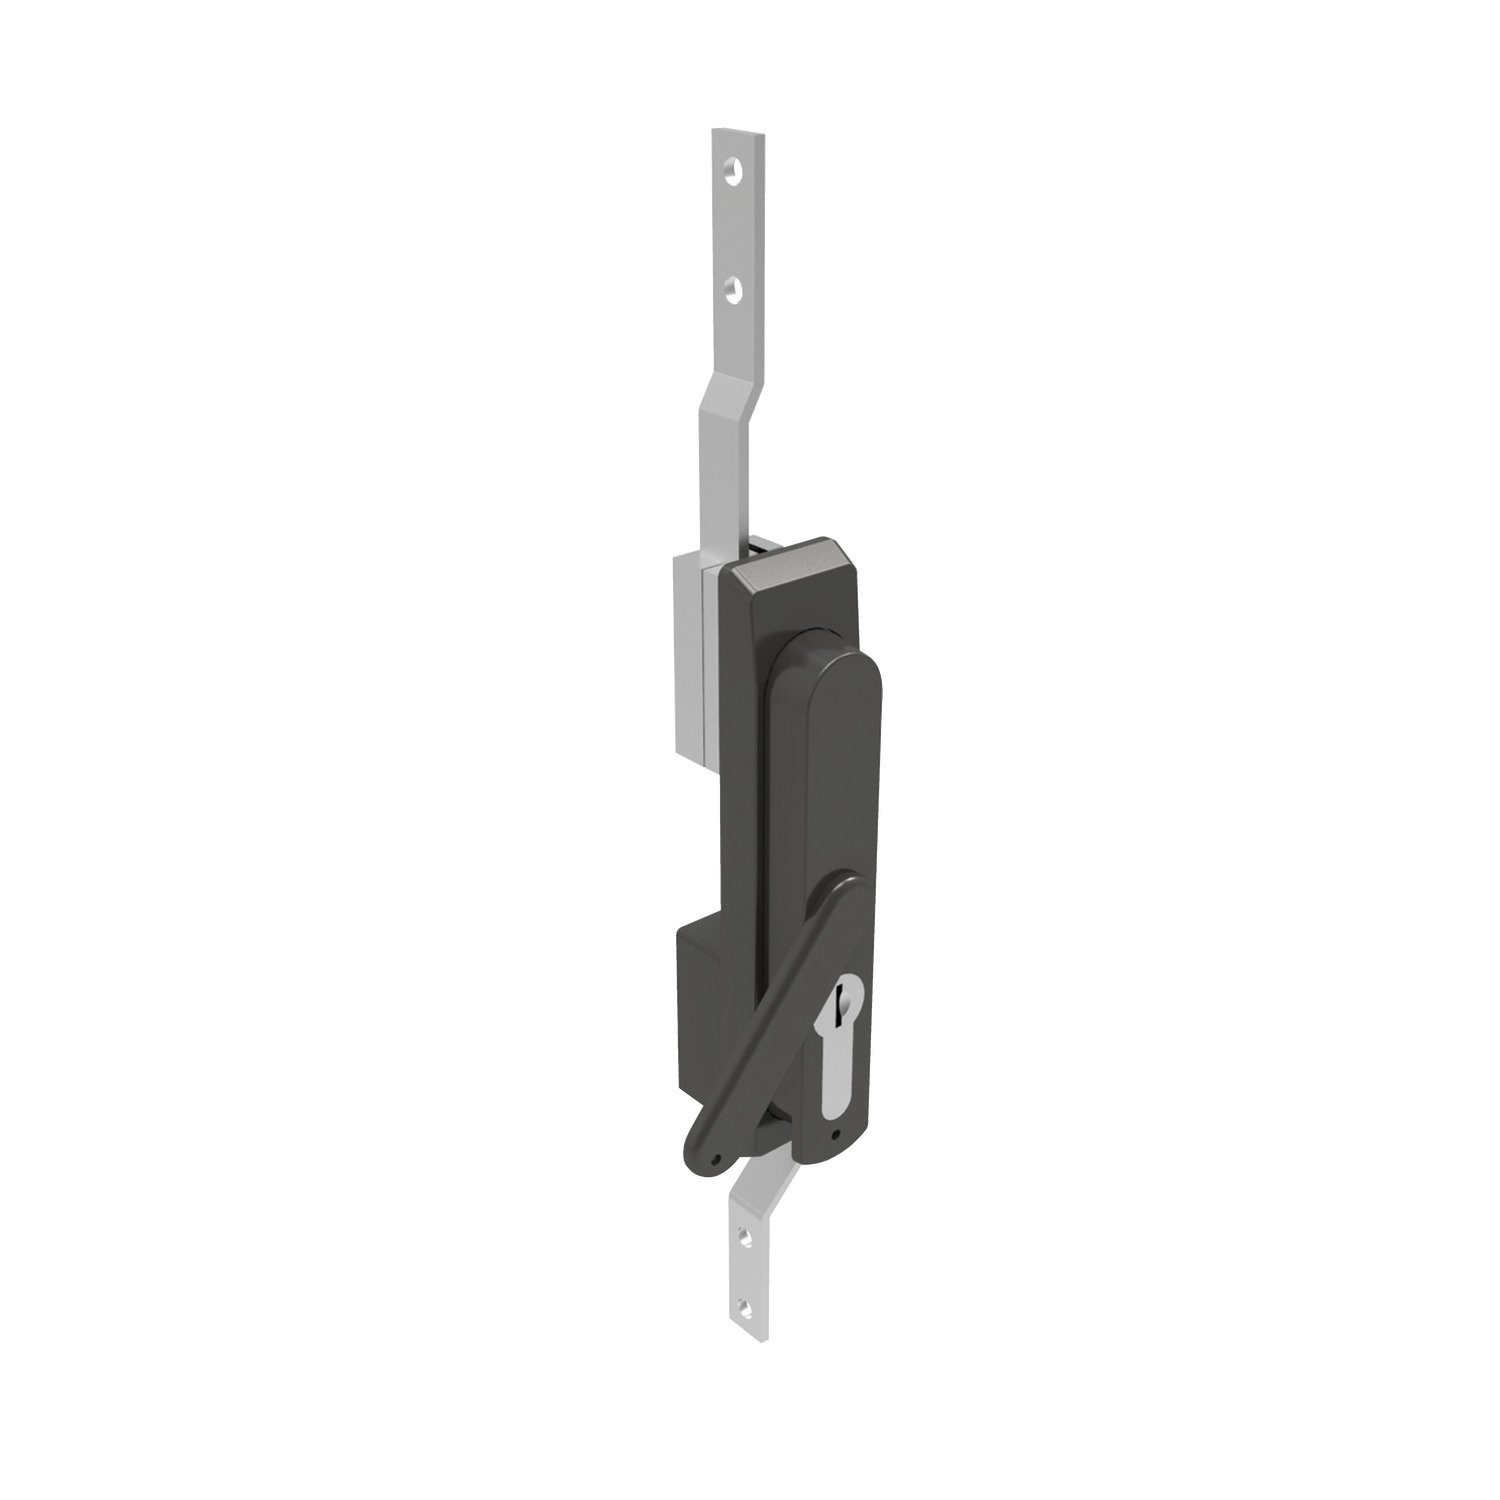 B2082.AW0010 Swing Handles with rod control